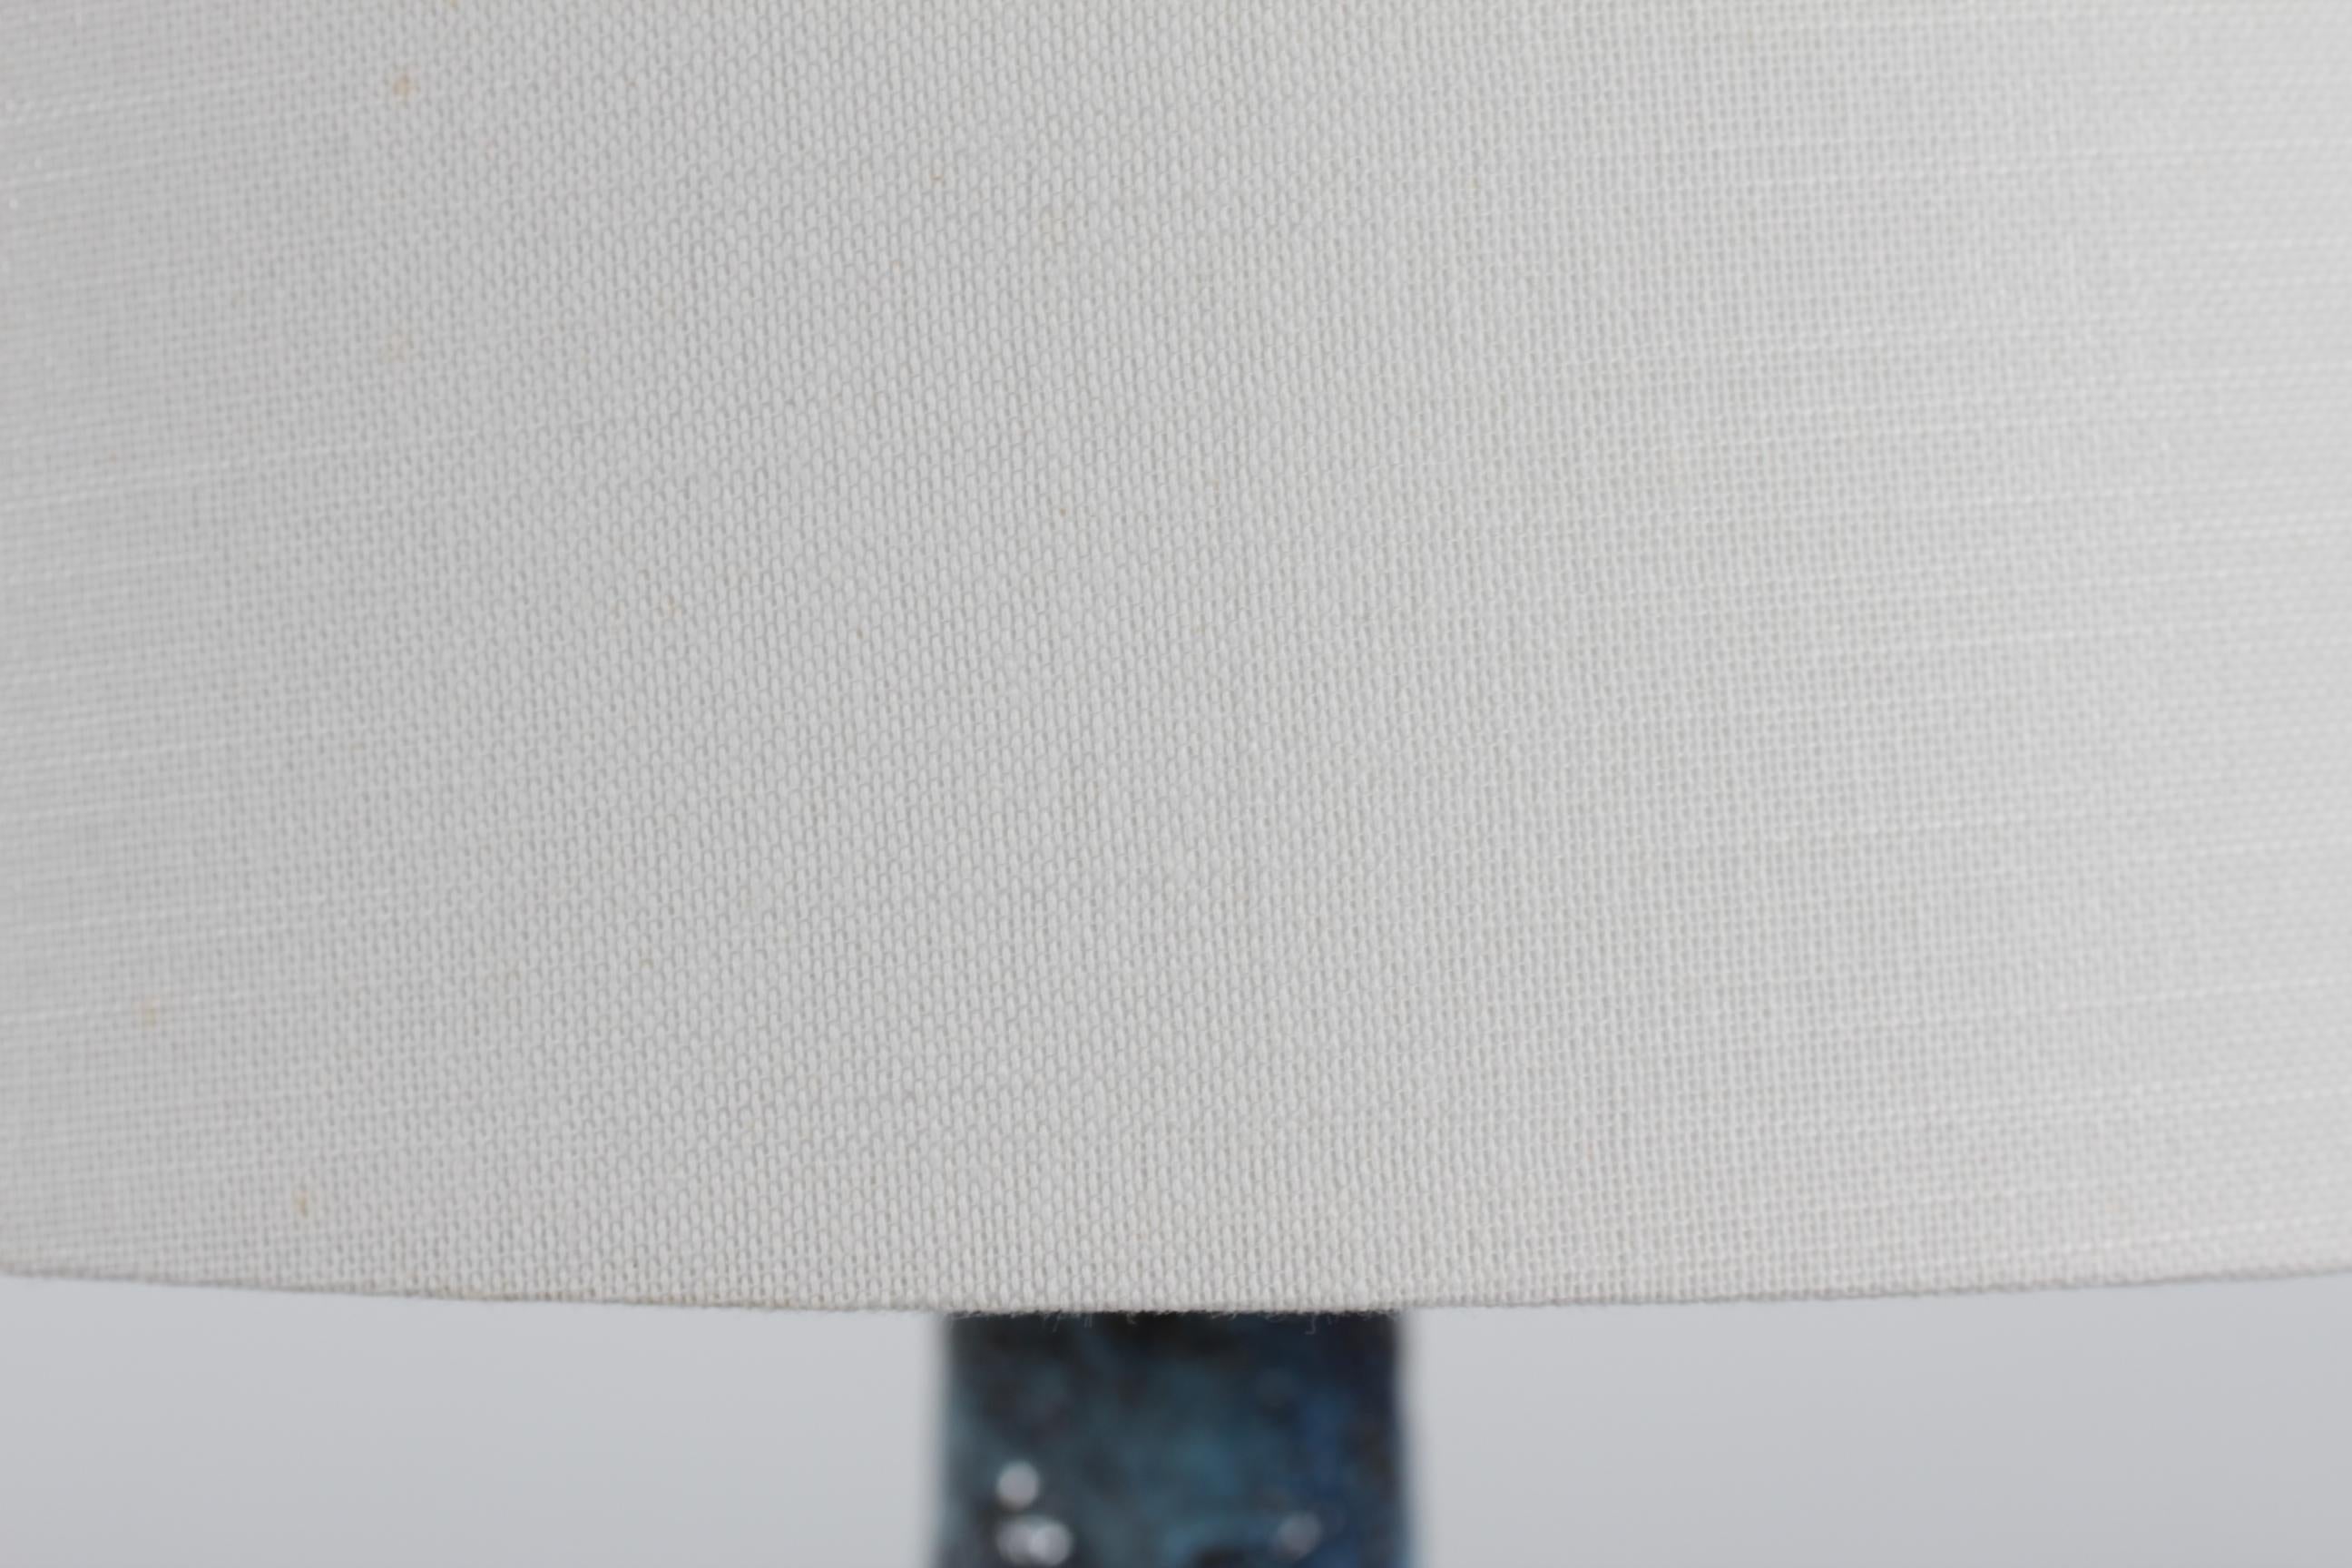 20th Century Danish Brutalist Ceramic Table Lamp by Artist Sejer with Blue Glaze Unica 1970s For Sale